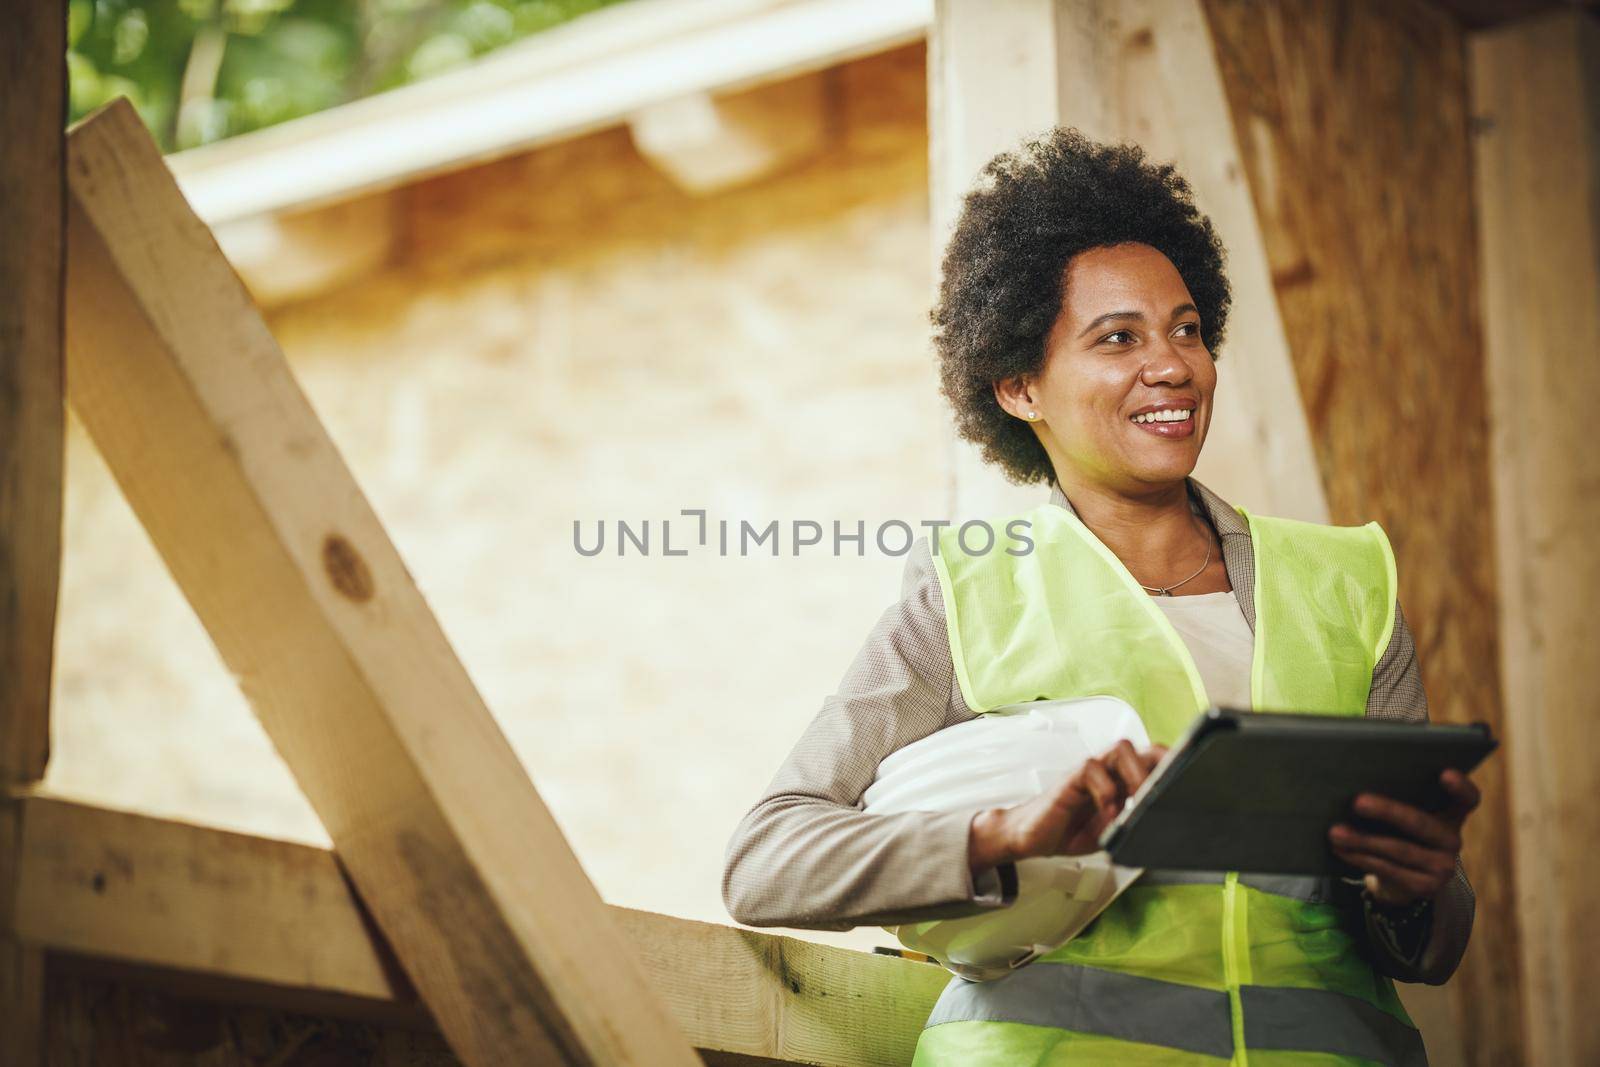 Shot of an African female architect using a digital tablet at the construction site of a new wooden house. She is wearing protective workwear and white helmet.
